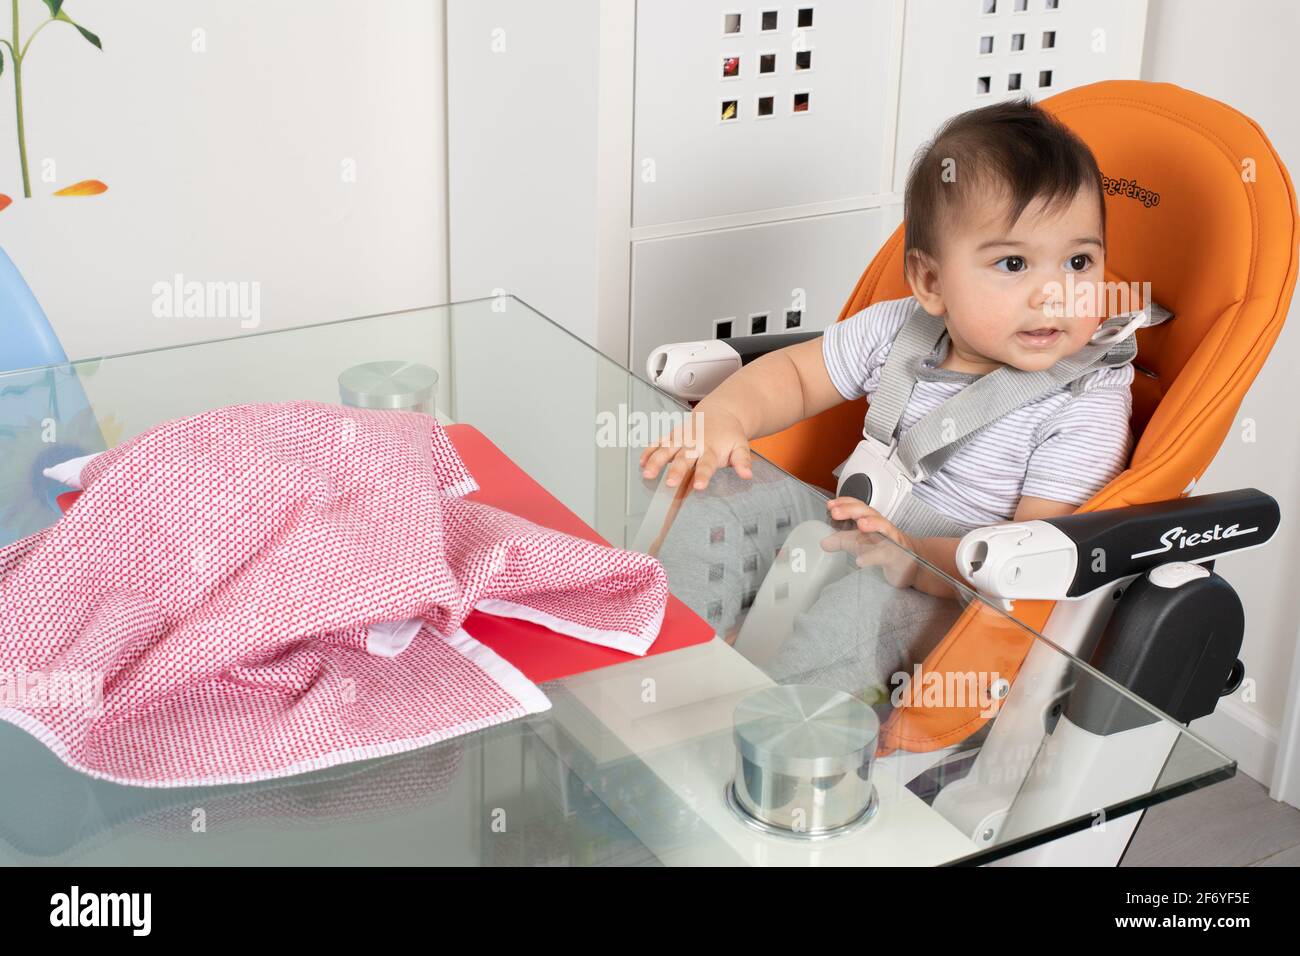 8 month old baby boy sitting in high chair at table Piaget Object Permanence sequence #2 looking away after toy is hidden by cloth lack of object perm Stock Photo